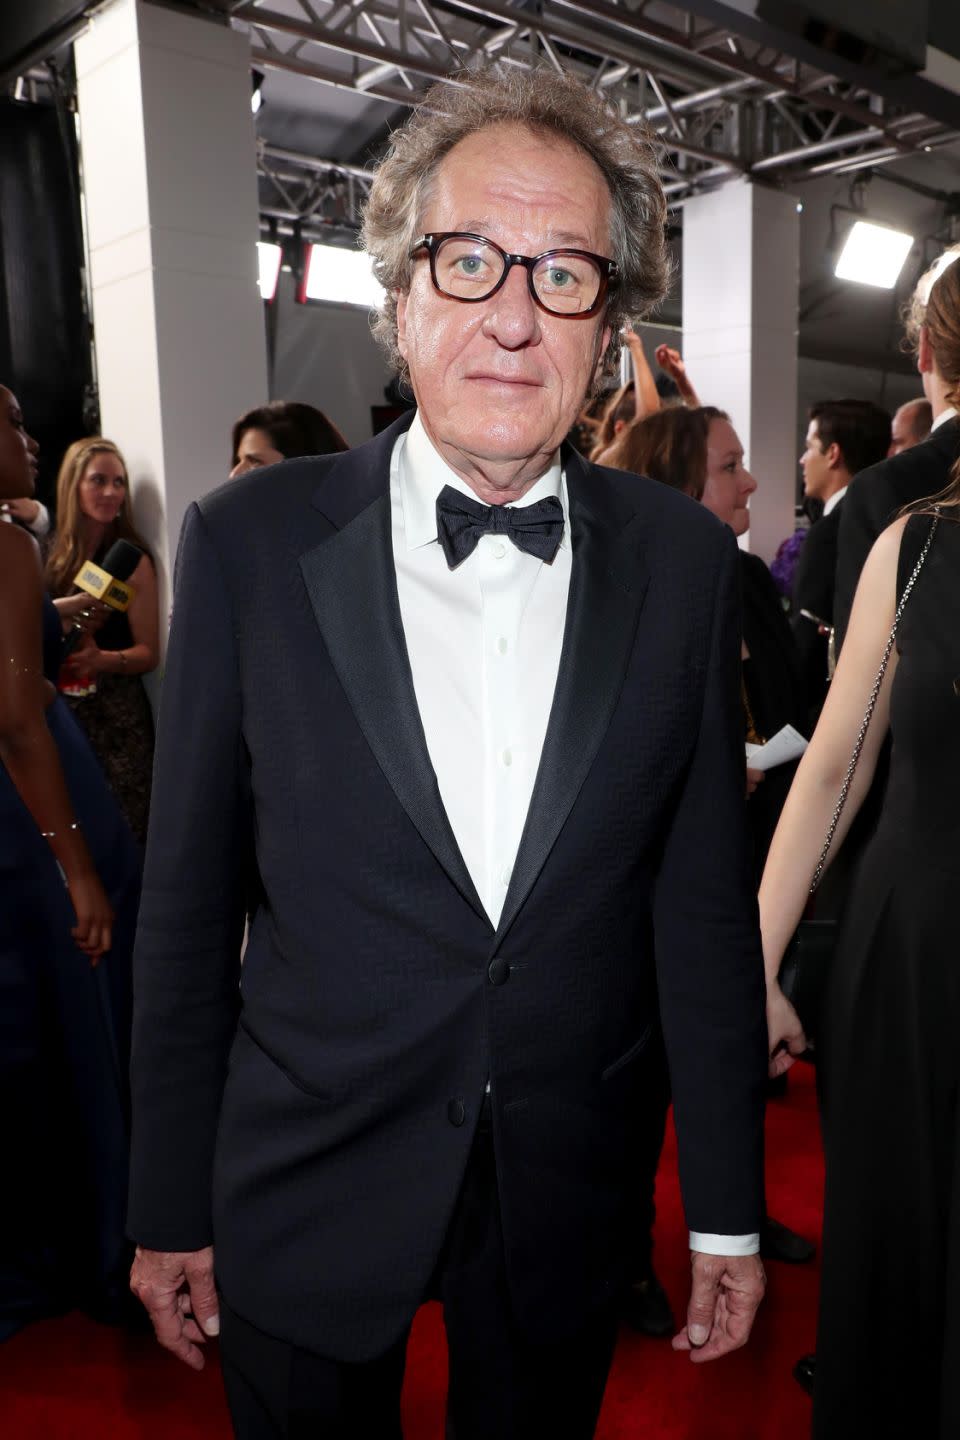 The STC company said it would not be commenting further on the matter involving Geoffrey Rush, pictured here last month. Source: Getty